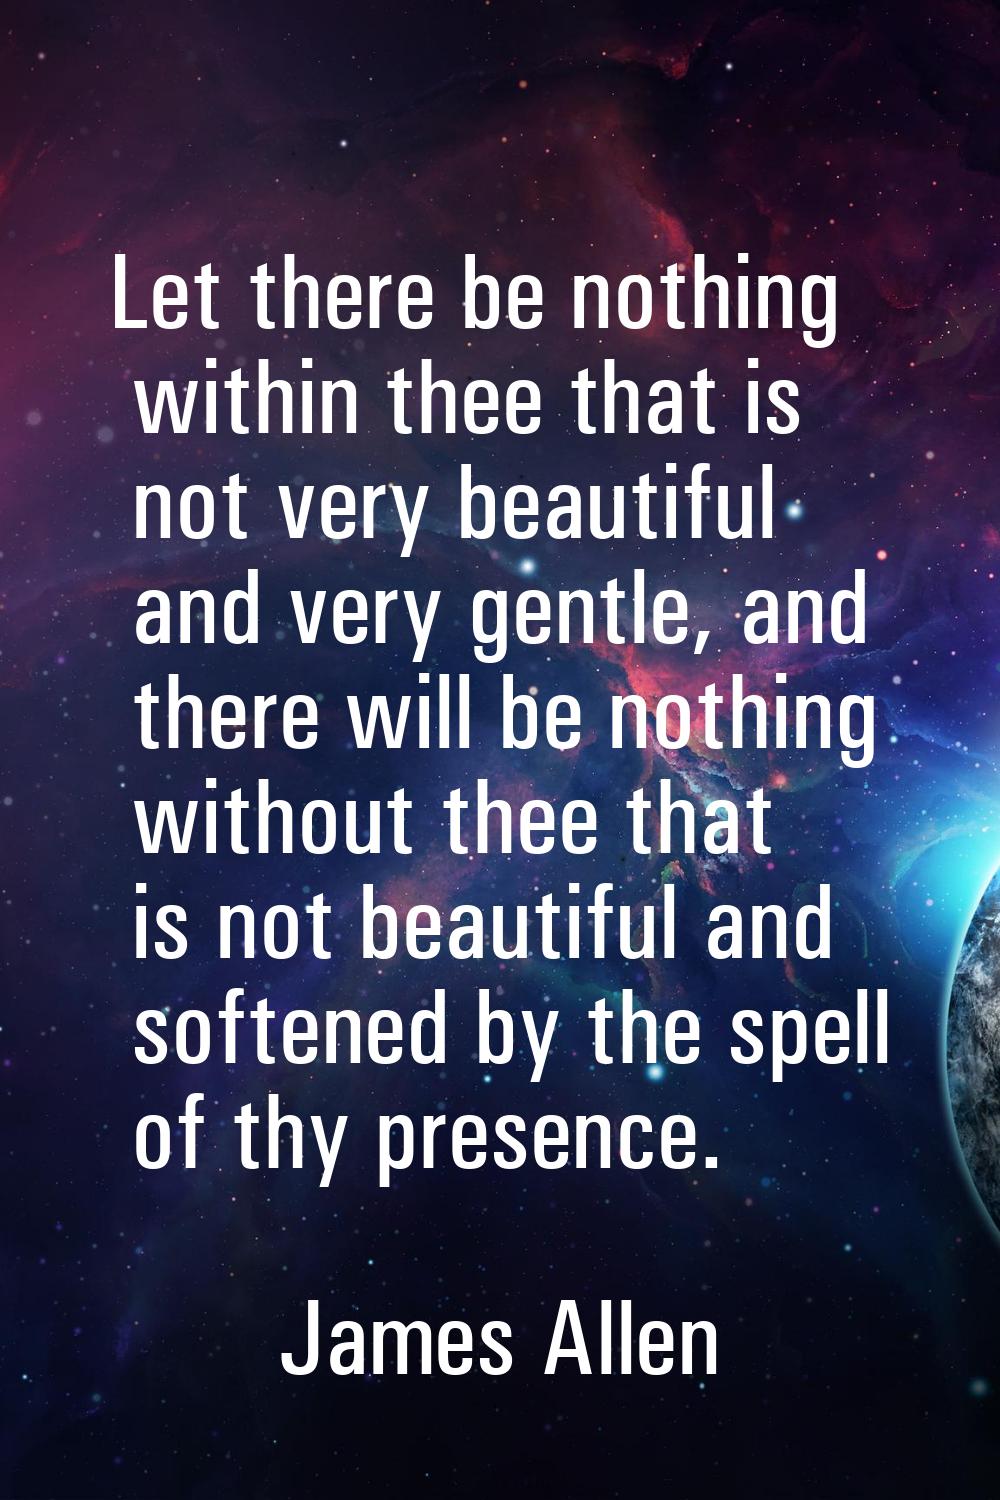 Let there be nothing within thee that is not very beautiful and very gentle, and there will be noth